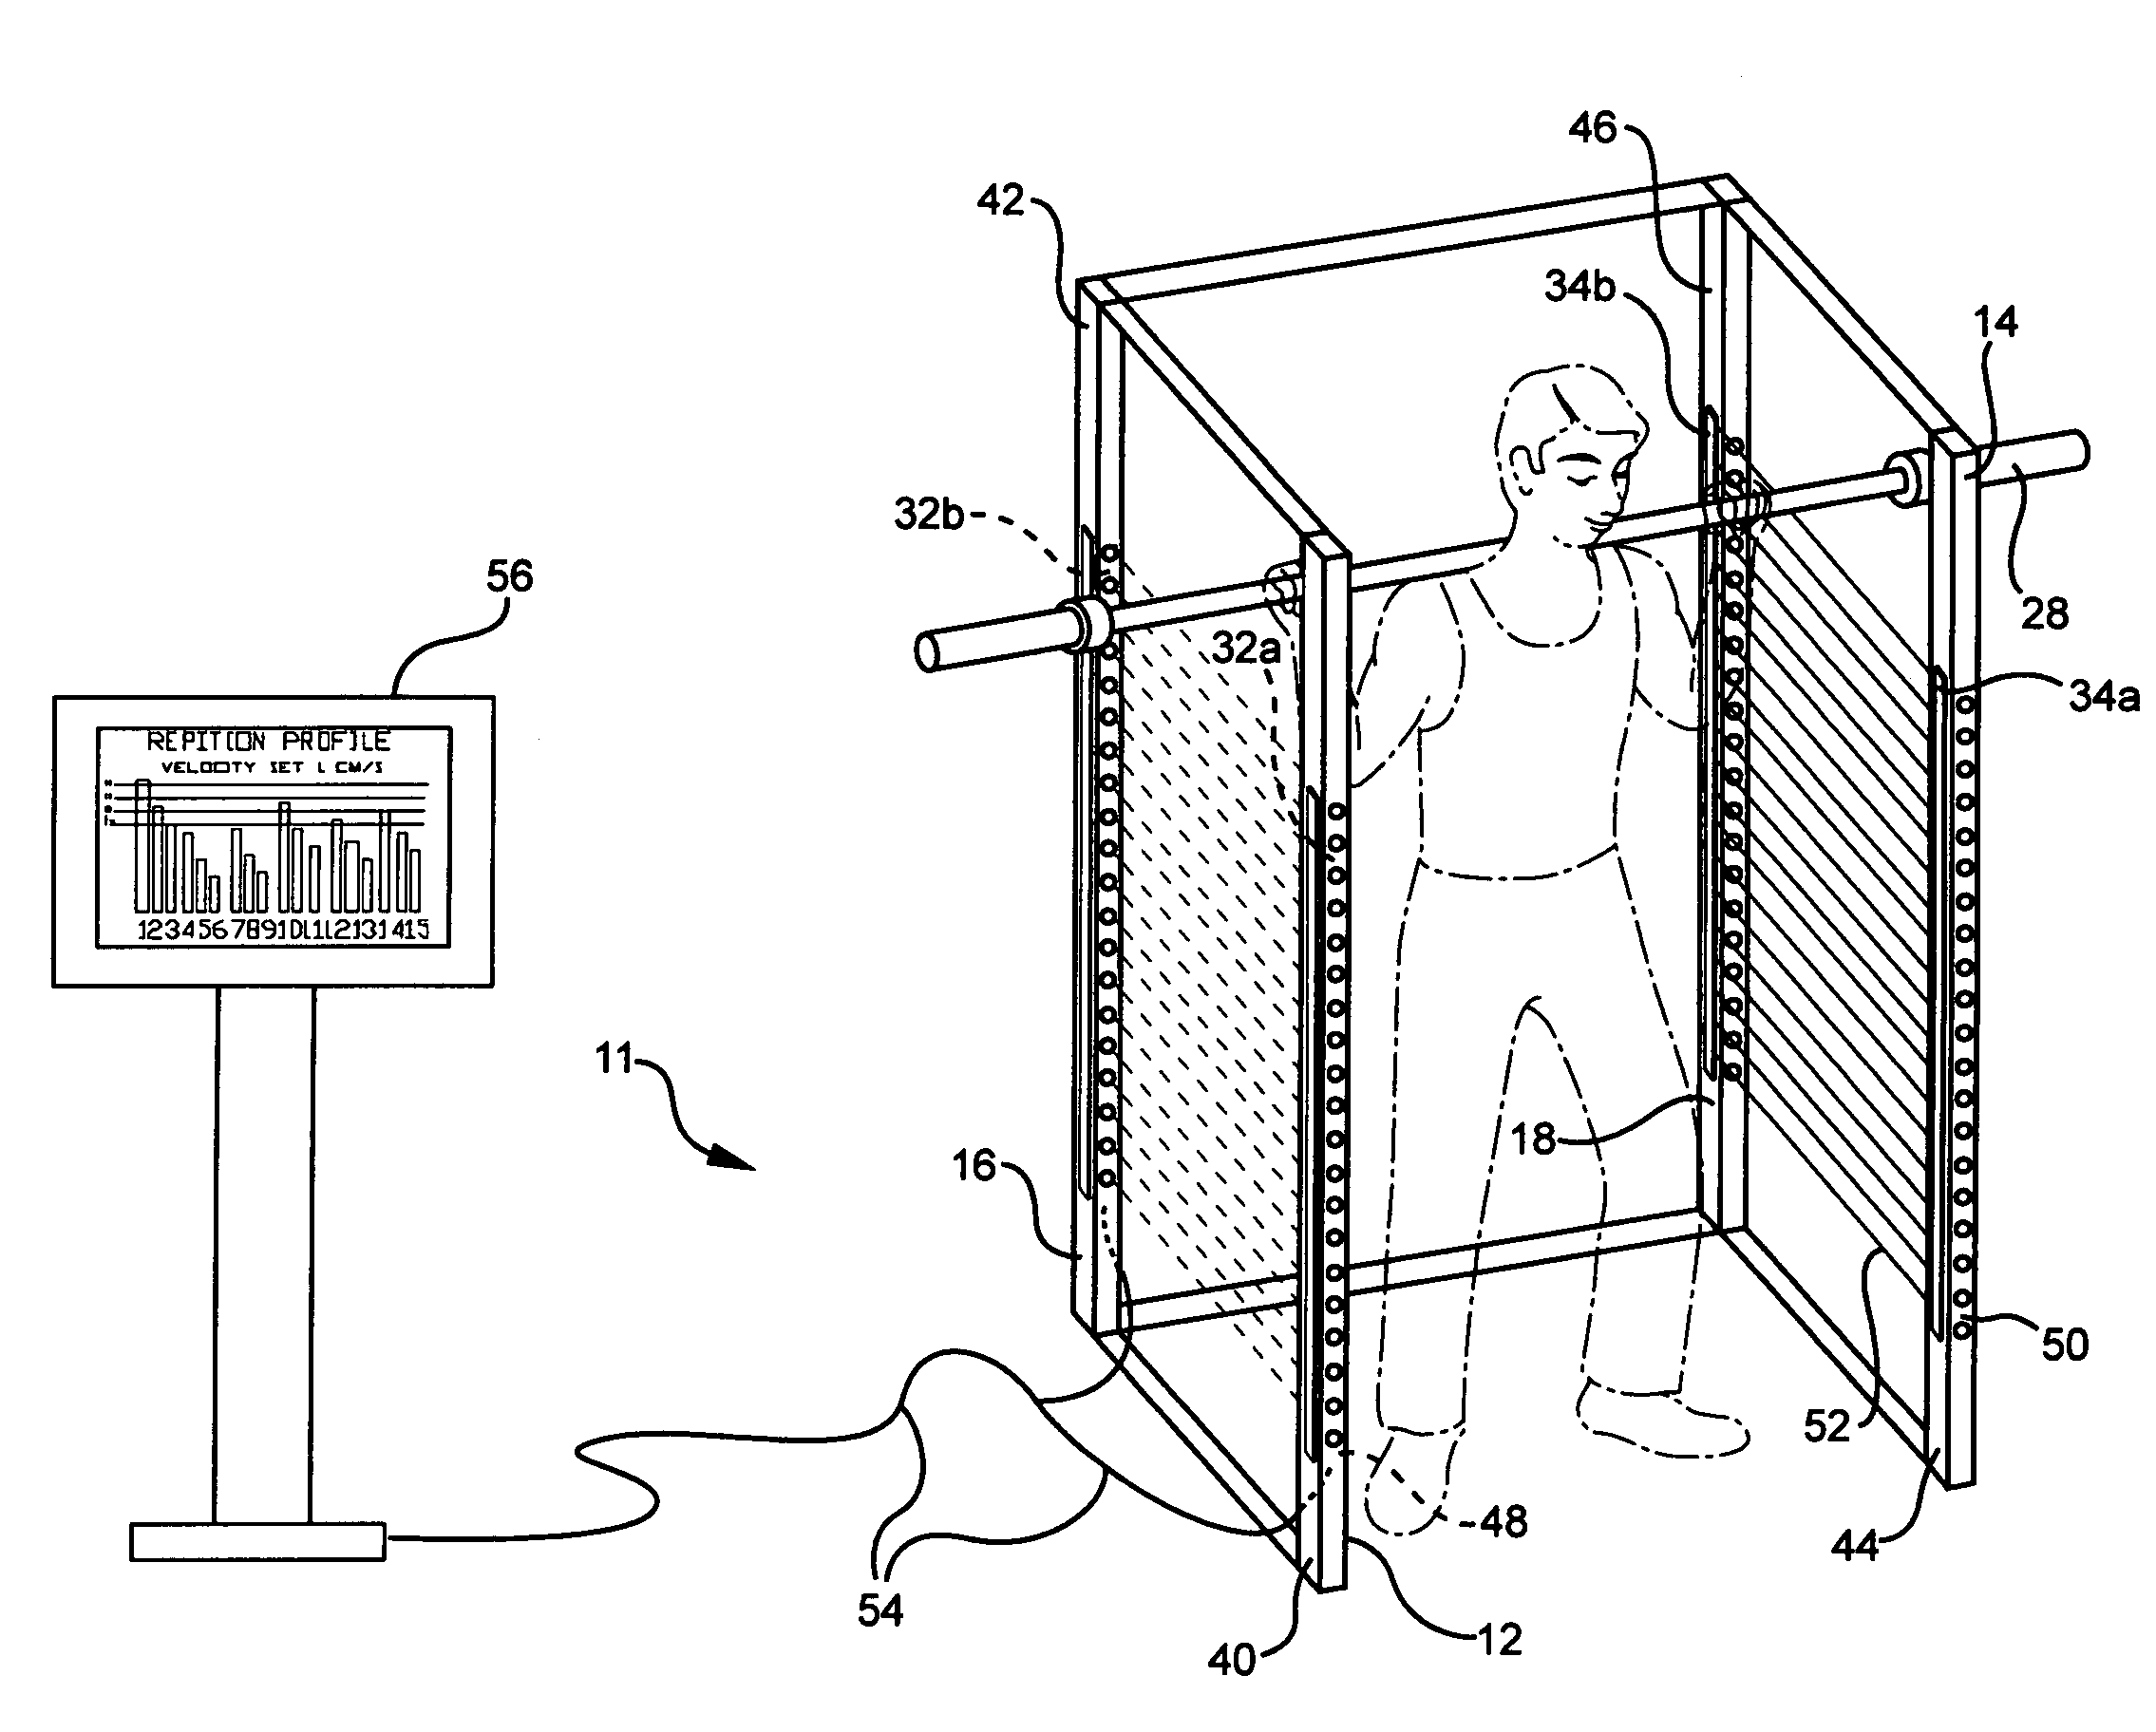 Free-weight exercise monitoring and feedback system and method